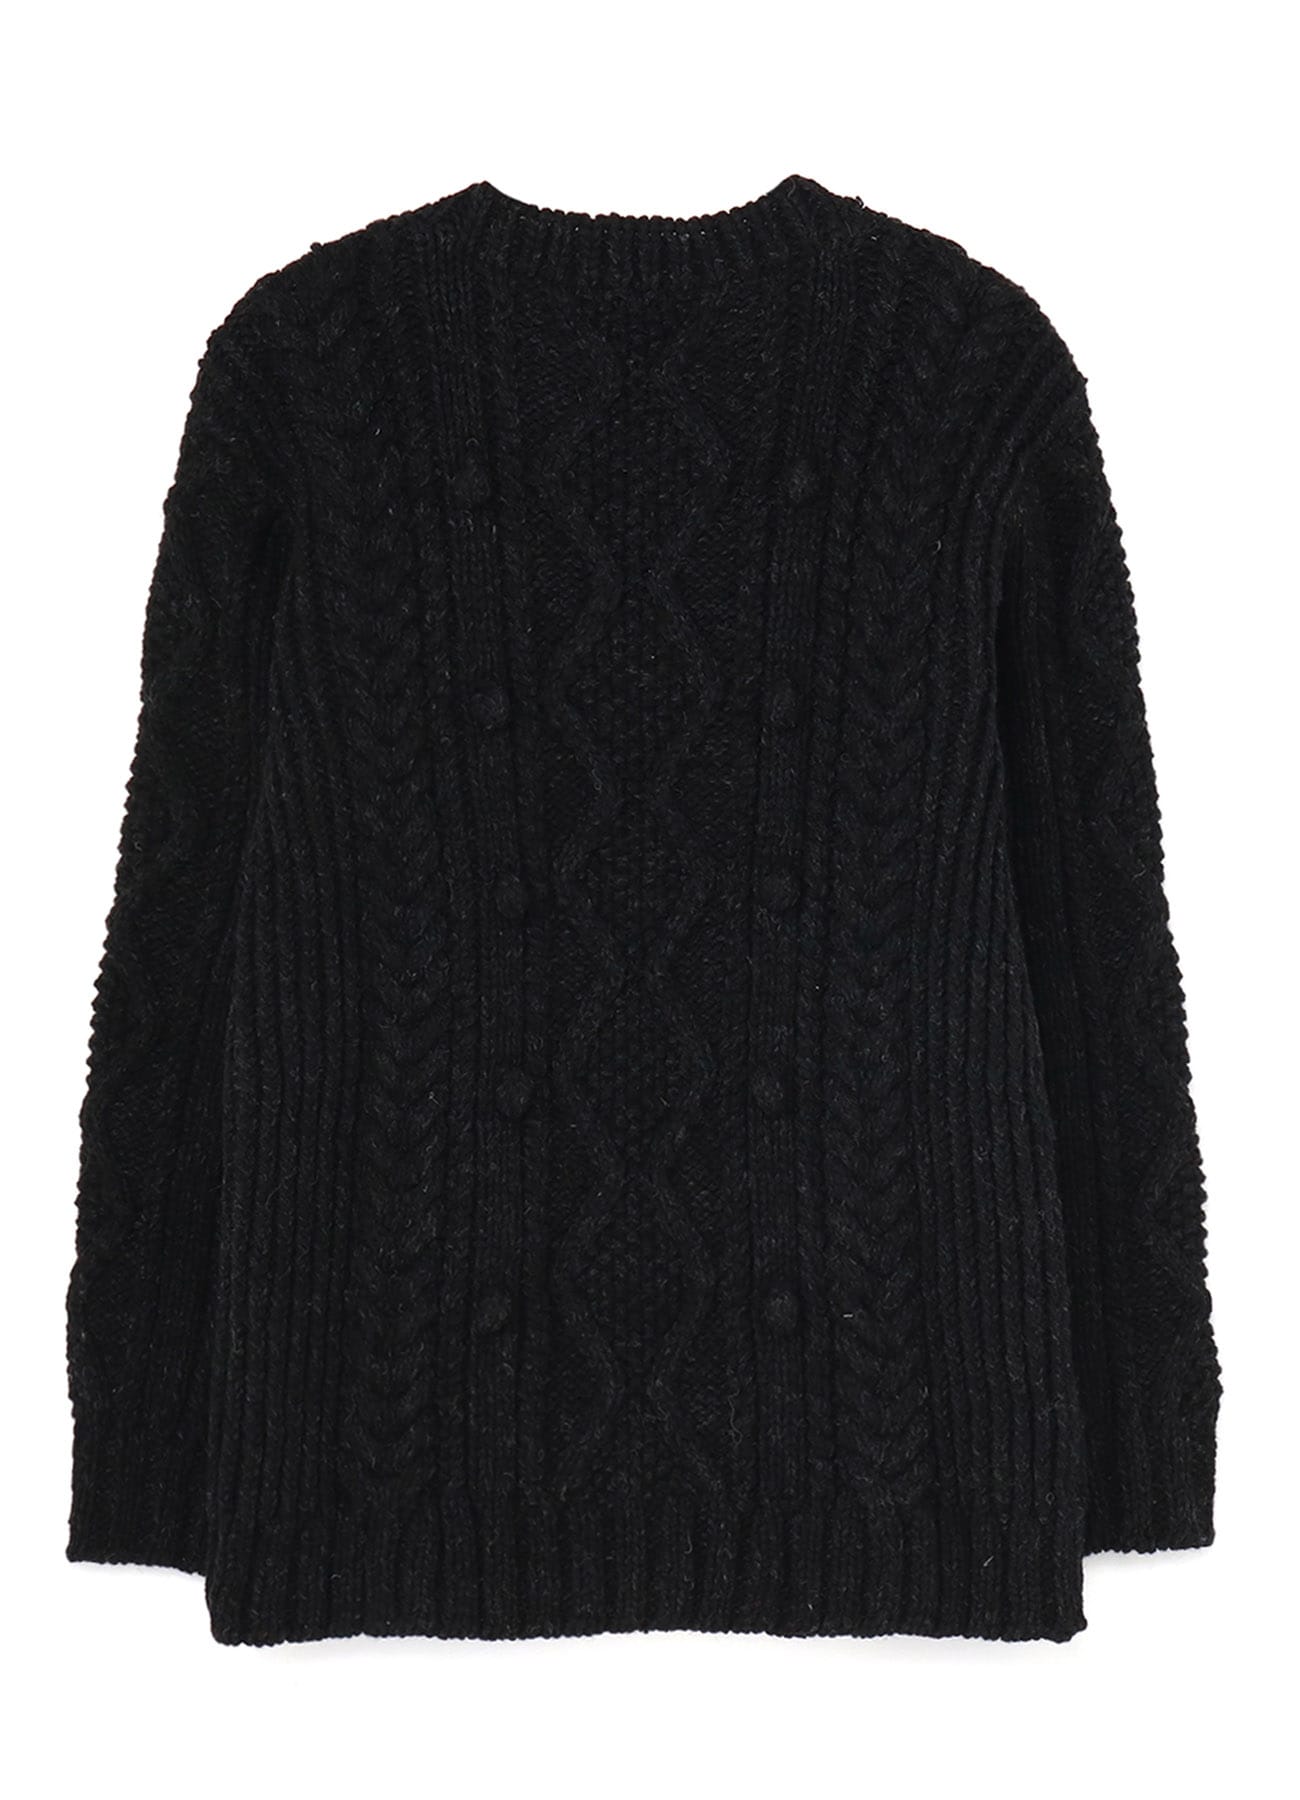 HAND-KNITTED ALLAN PATTRN ROUND NECK PULLOVER(S Charcoal): Vintage